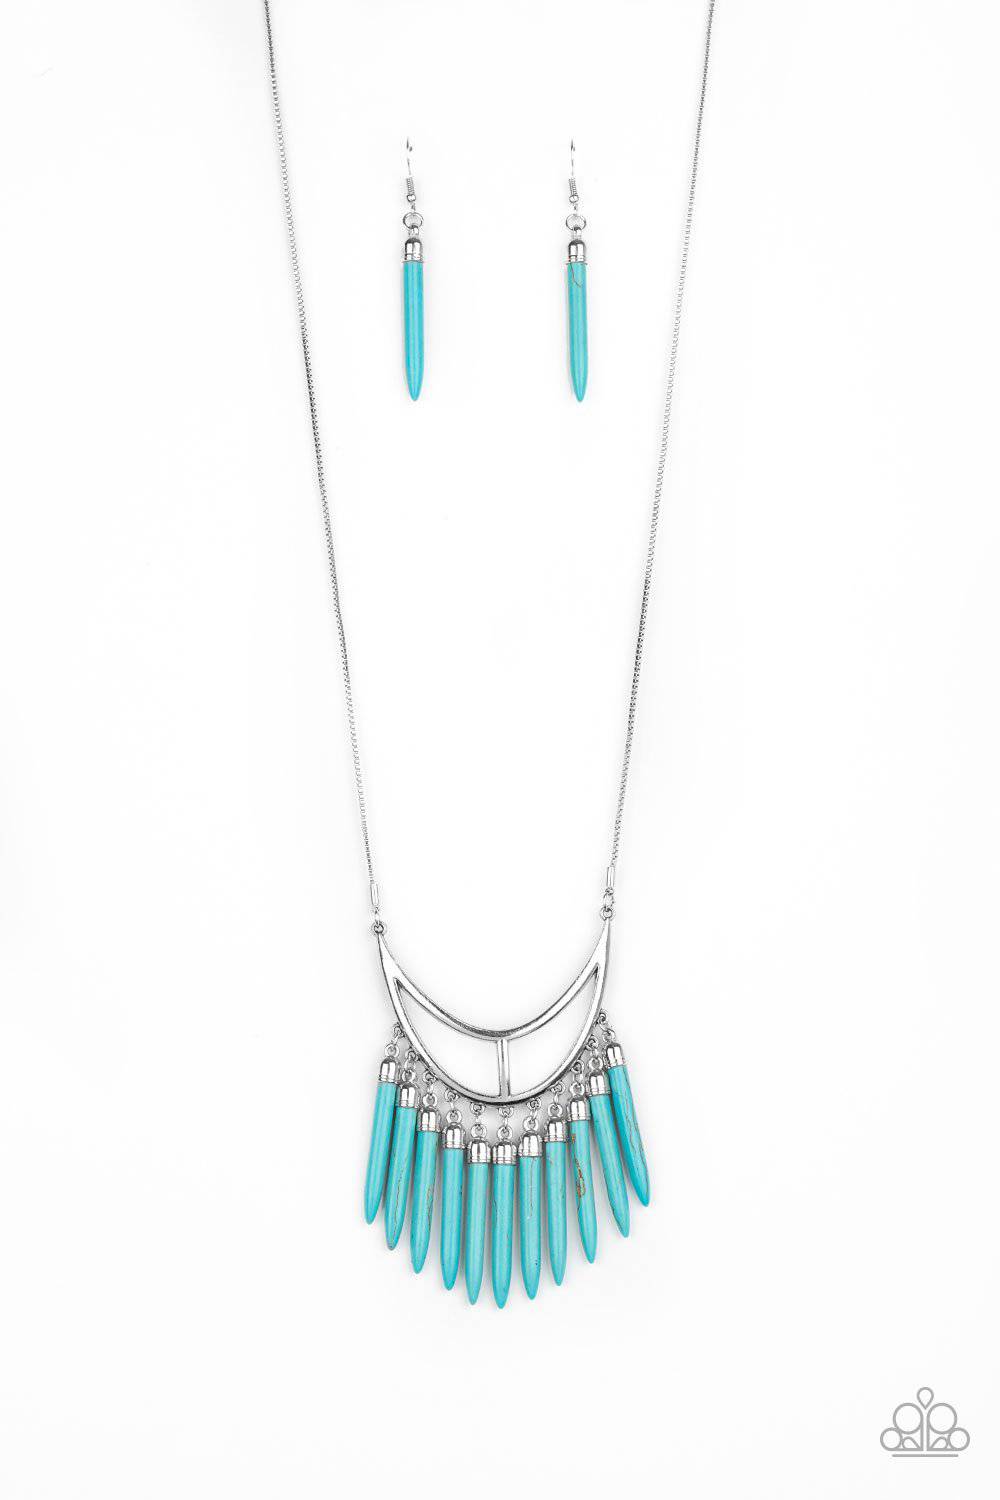 Stone Age A-Lister - Blue Fringe Necklace - Paparazzi Accessories - GlaMarous Titi Jewels